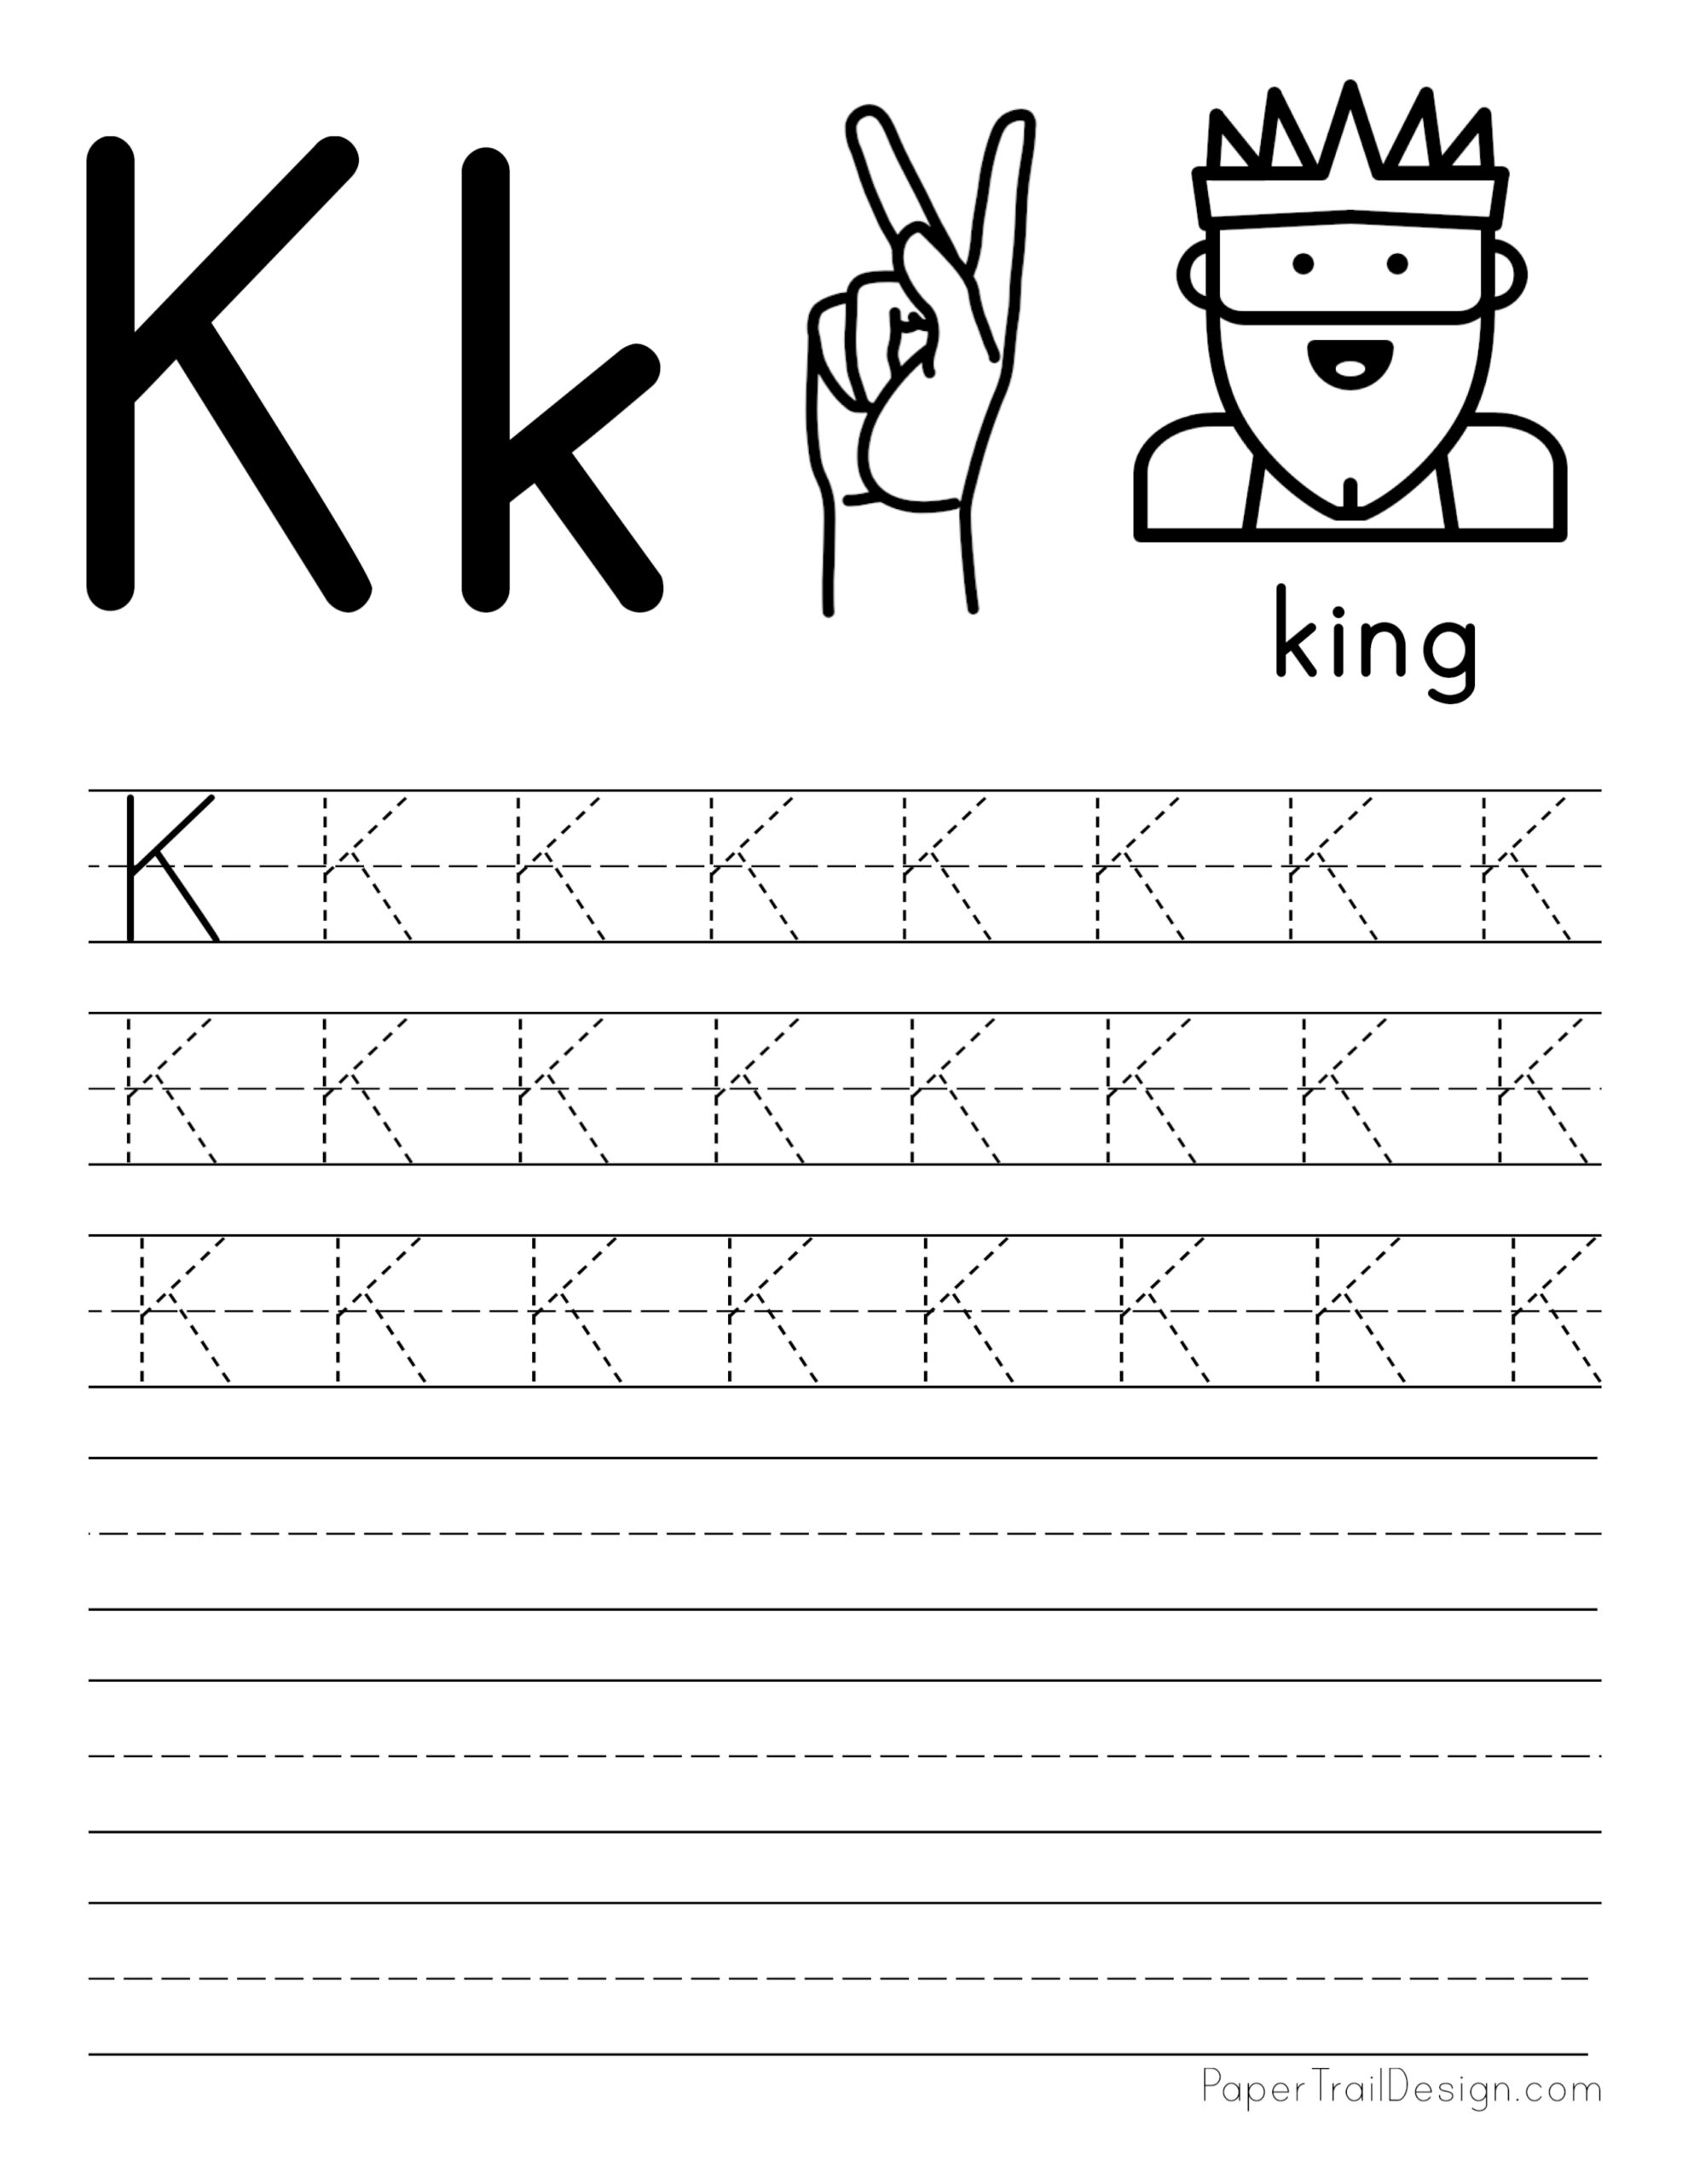 capital-letter-k-tracing-worksheet-printable-form-templates-and-letter